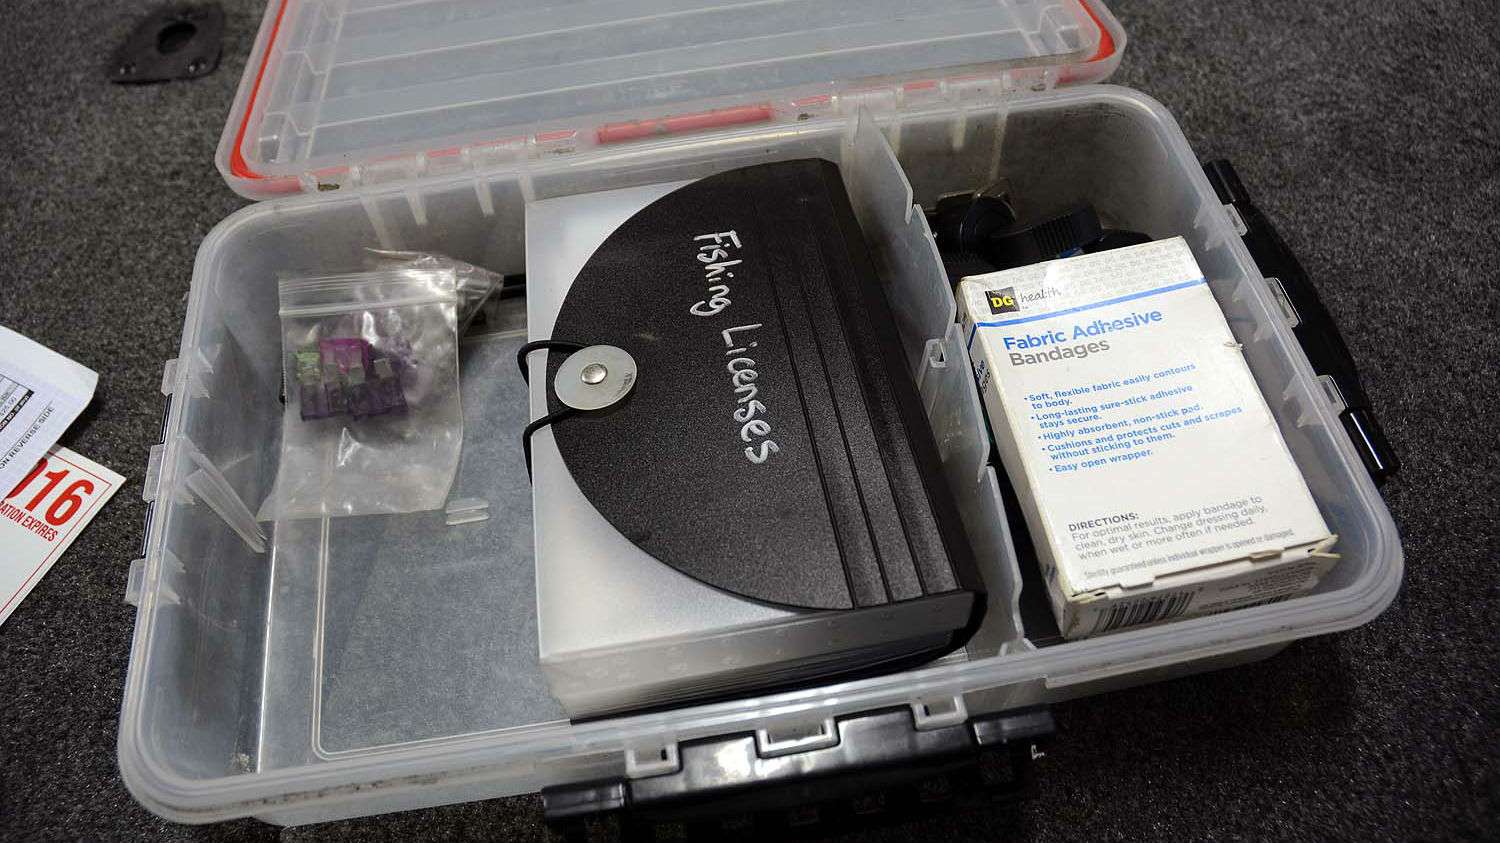 Organization comes down to the smallest items. The small pouch holds fishing licenses from around the country. The box contains boat insurance and state registration papers. 